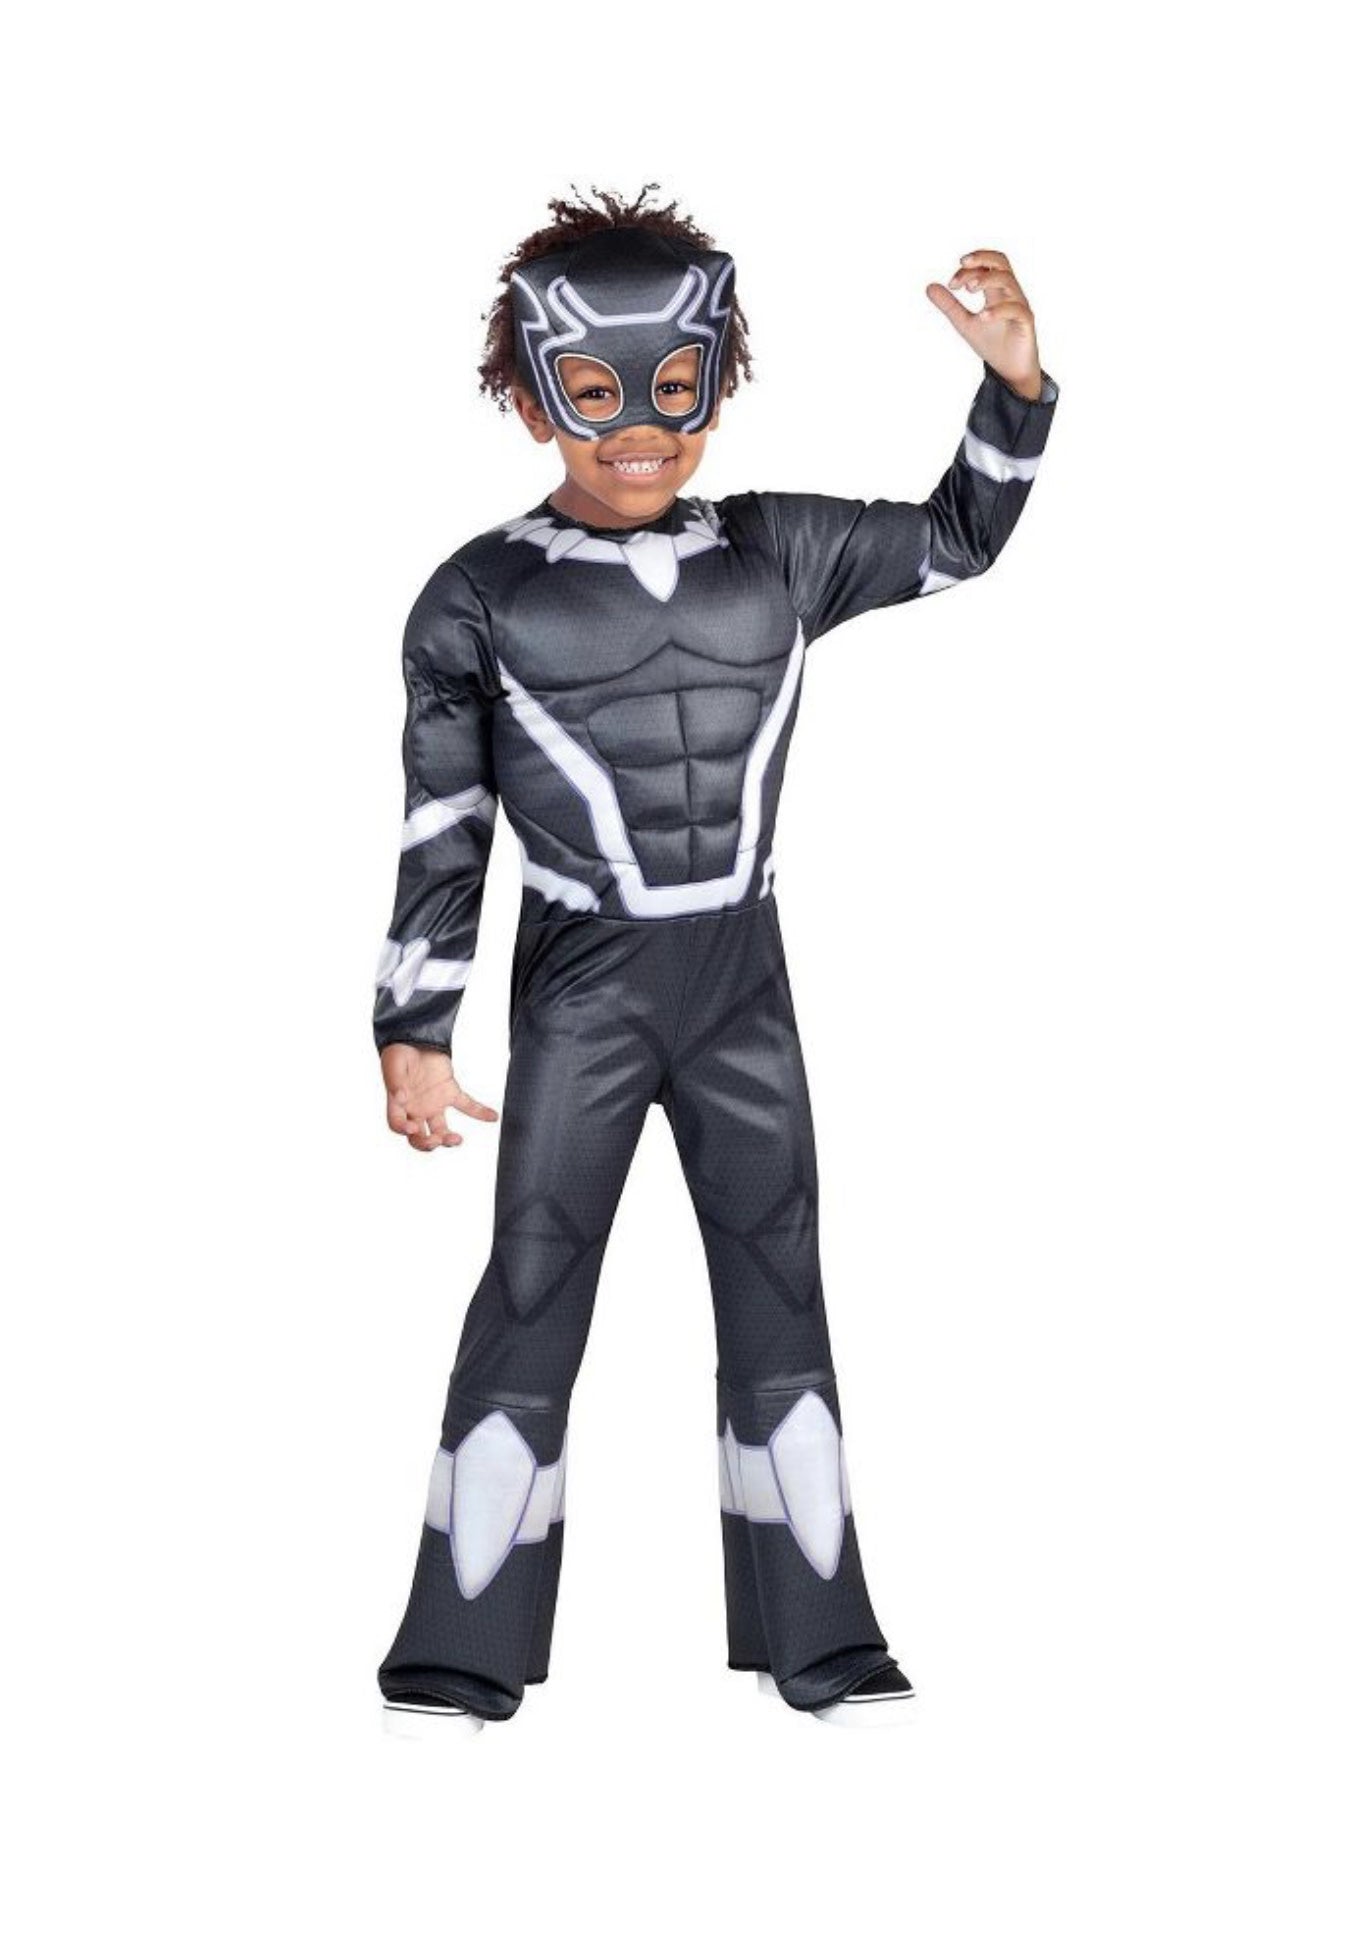 Costume Bambin - Marvel Black Panther - Todd(3T-4T)Party Shop